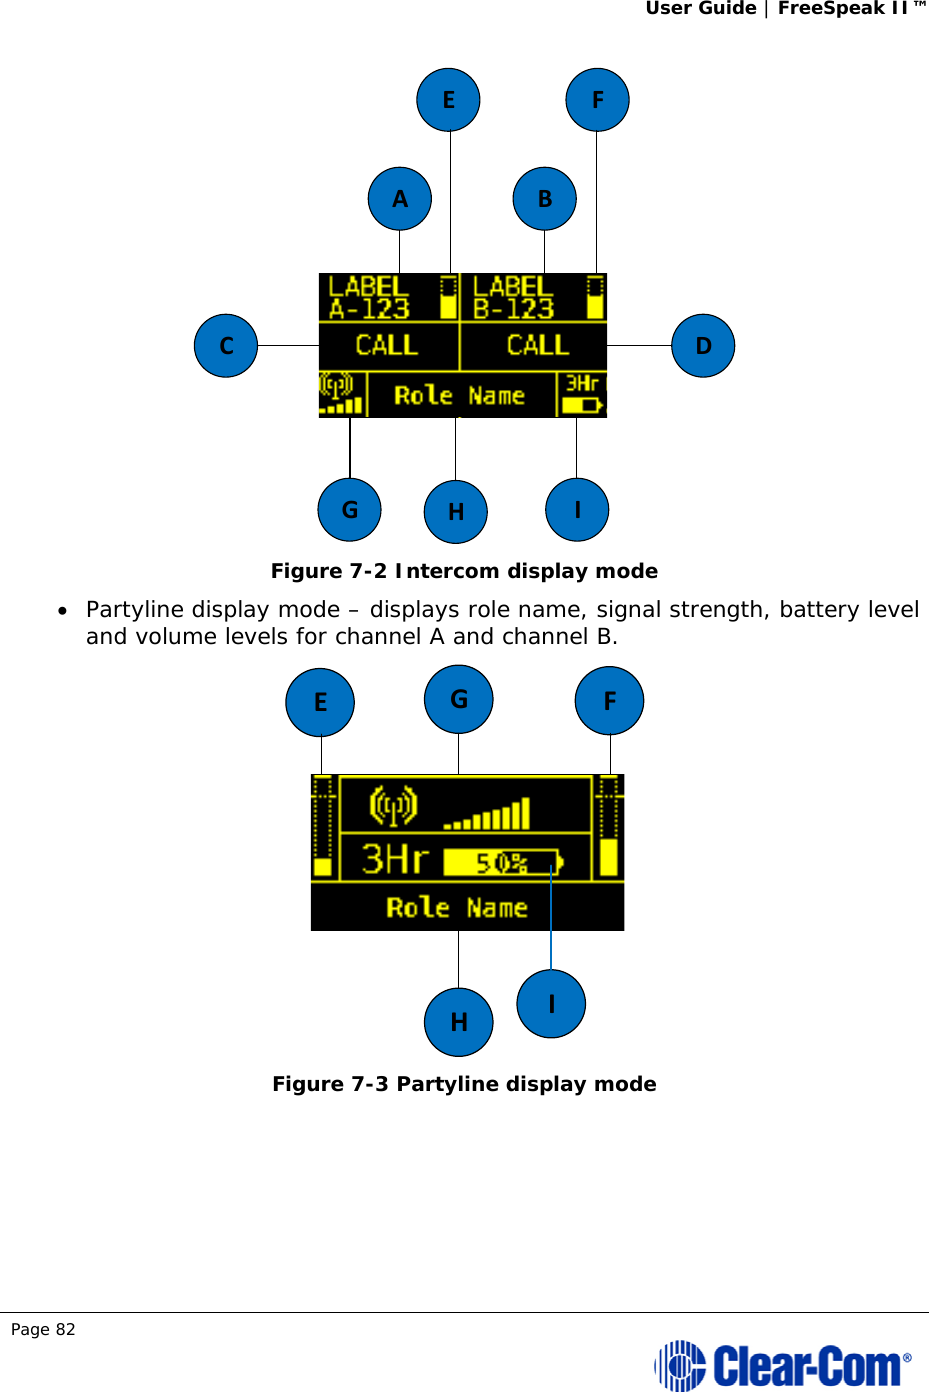 User Guide | FreeSpeak II™  Page 82   Figure 7-2 Intercom display mode  Partyline display mode – displays role name, signal strength, battery level and volume levels for channel A and channel B.  Figure 7-3 Partyline display mode      A BDCGHIE FHIGEF